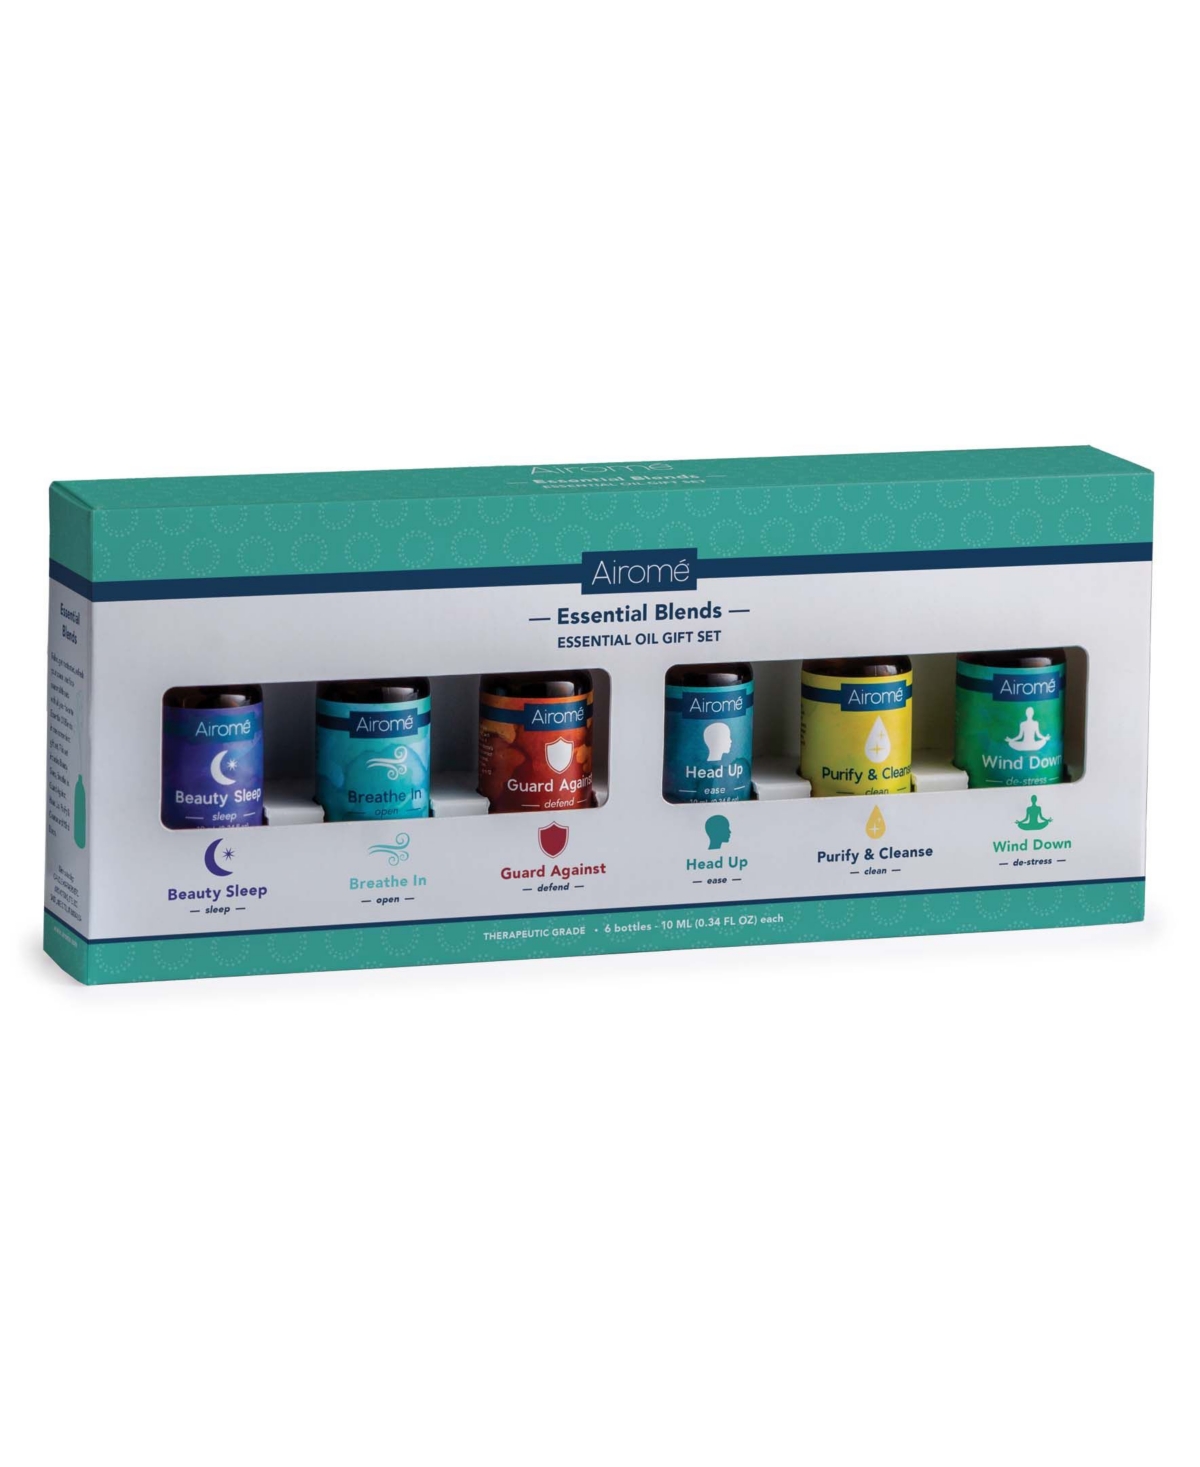 Airome Essential Blends Gift Set, 6 Piece In Turquoise